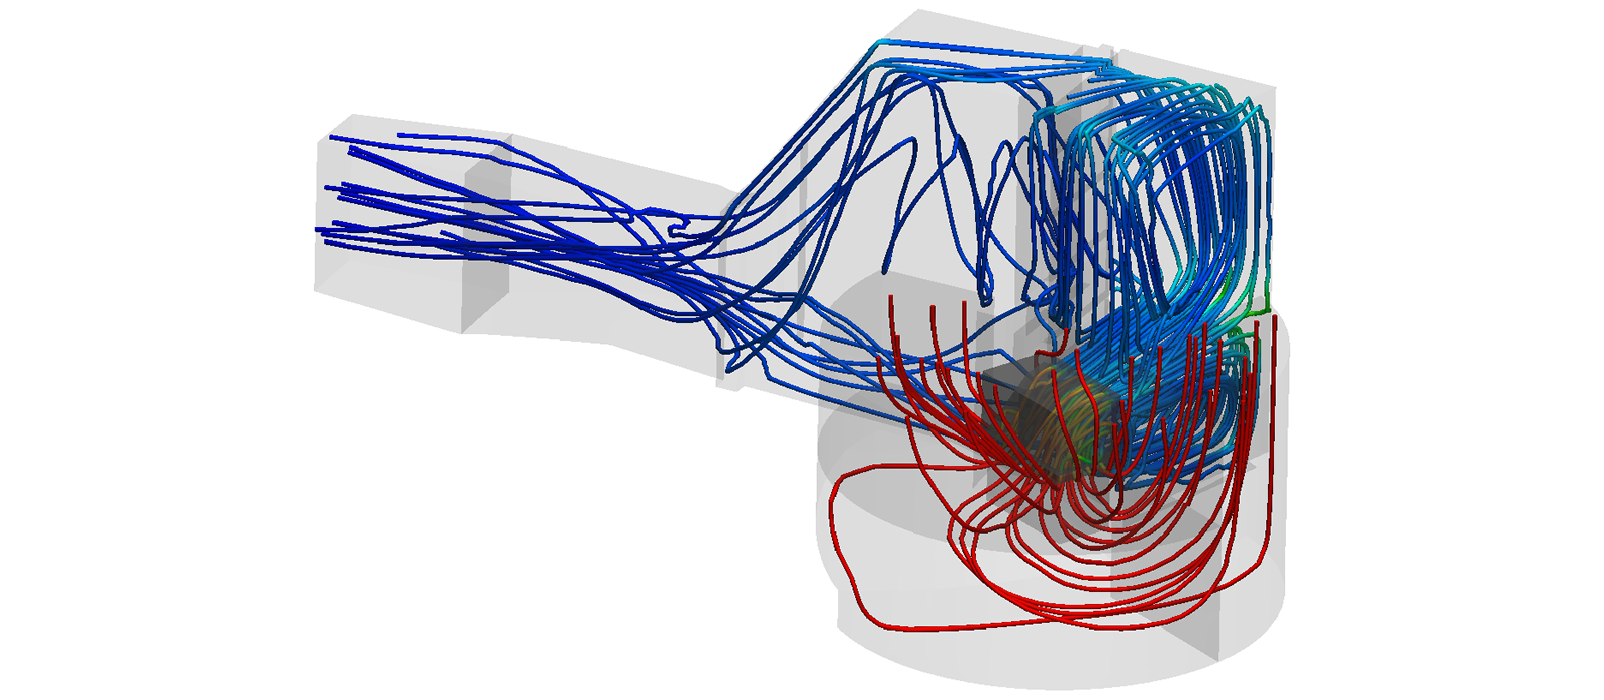 CFD Particle tracing illustrates the flow path through the structure.